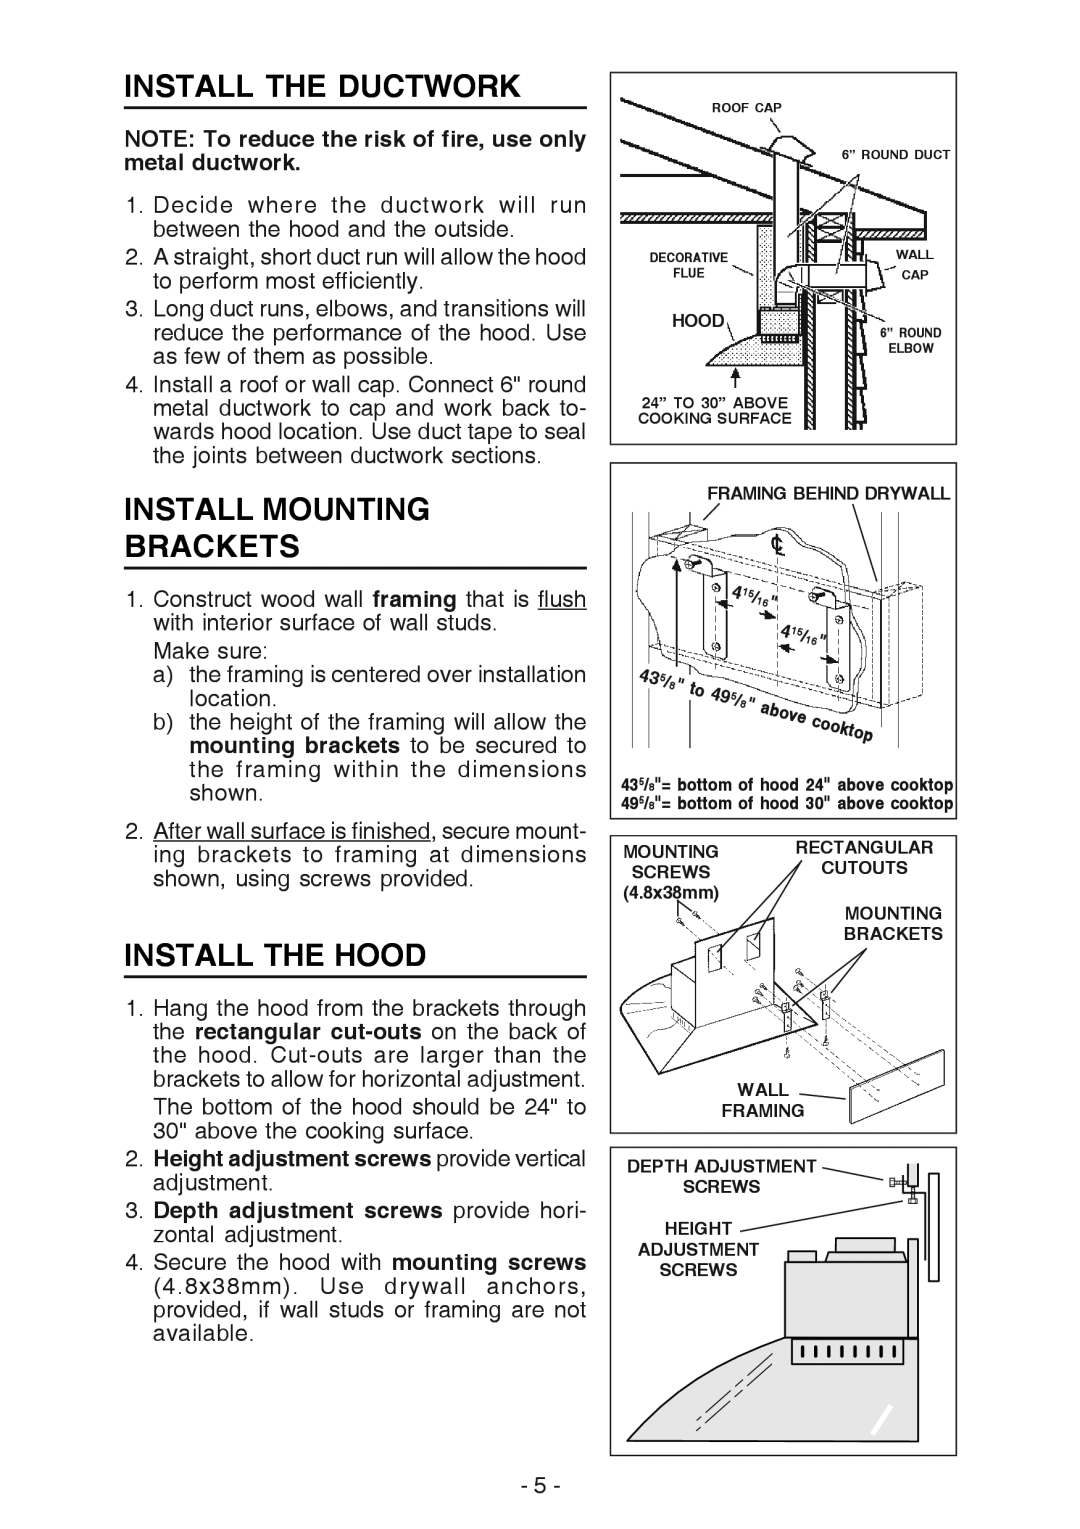 NuTone NP629004 manual Install The Ductwork, Install Mounting Brackets, Install The Hood 